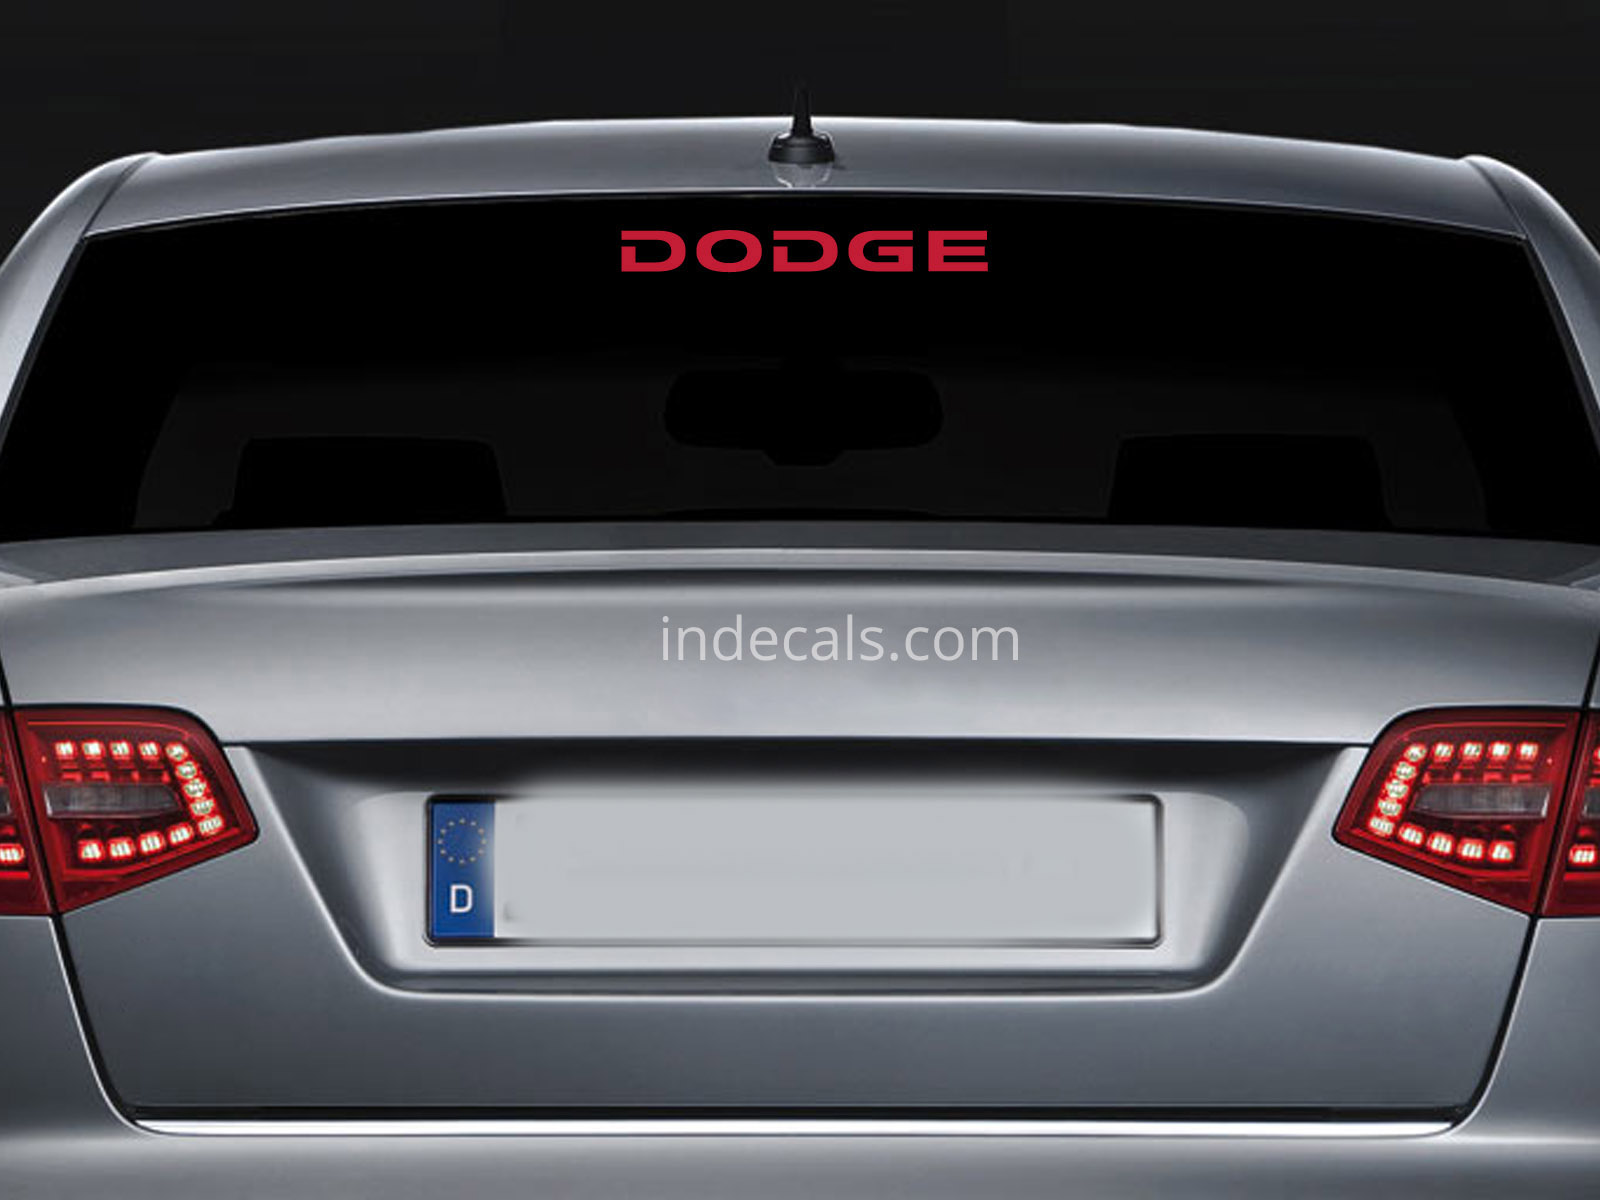 1 x Dodge Sticker for Windshield or Back Window - Red